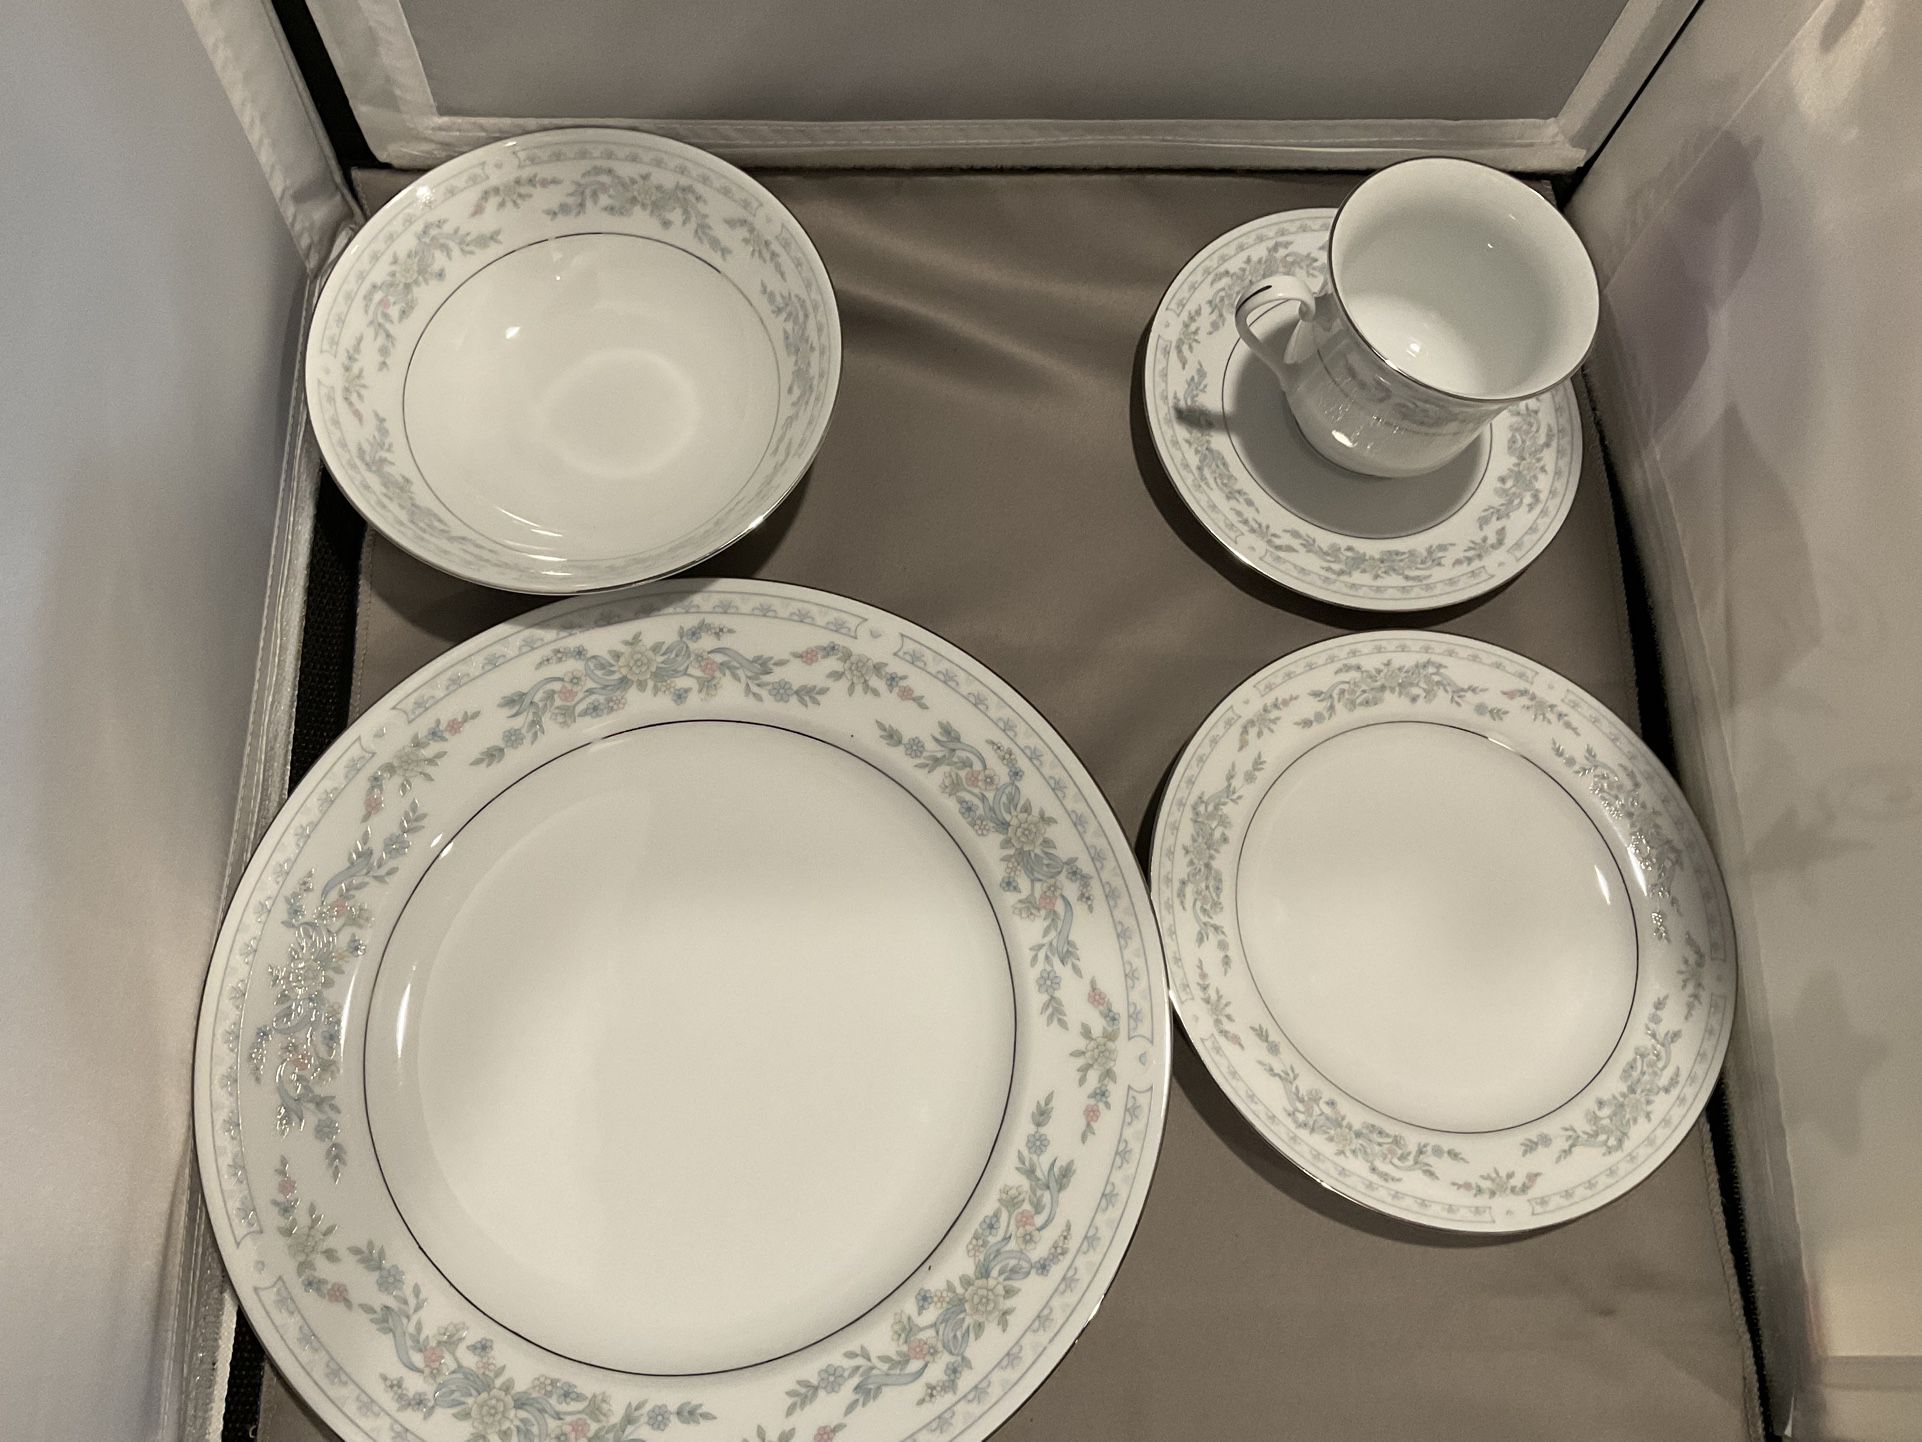 China By Somerset NL Excel. Blue Floral With Silver Trim, Set Of 4, 20 Pieces